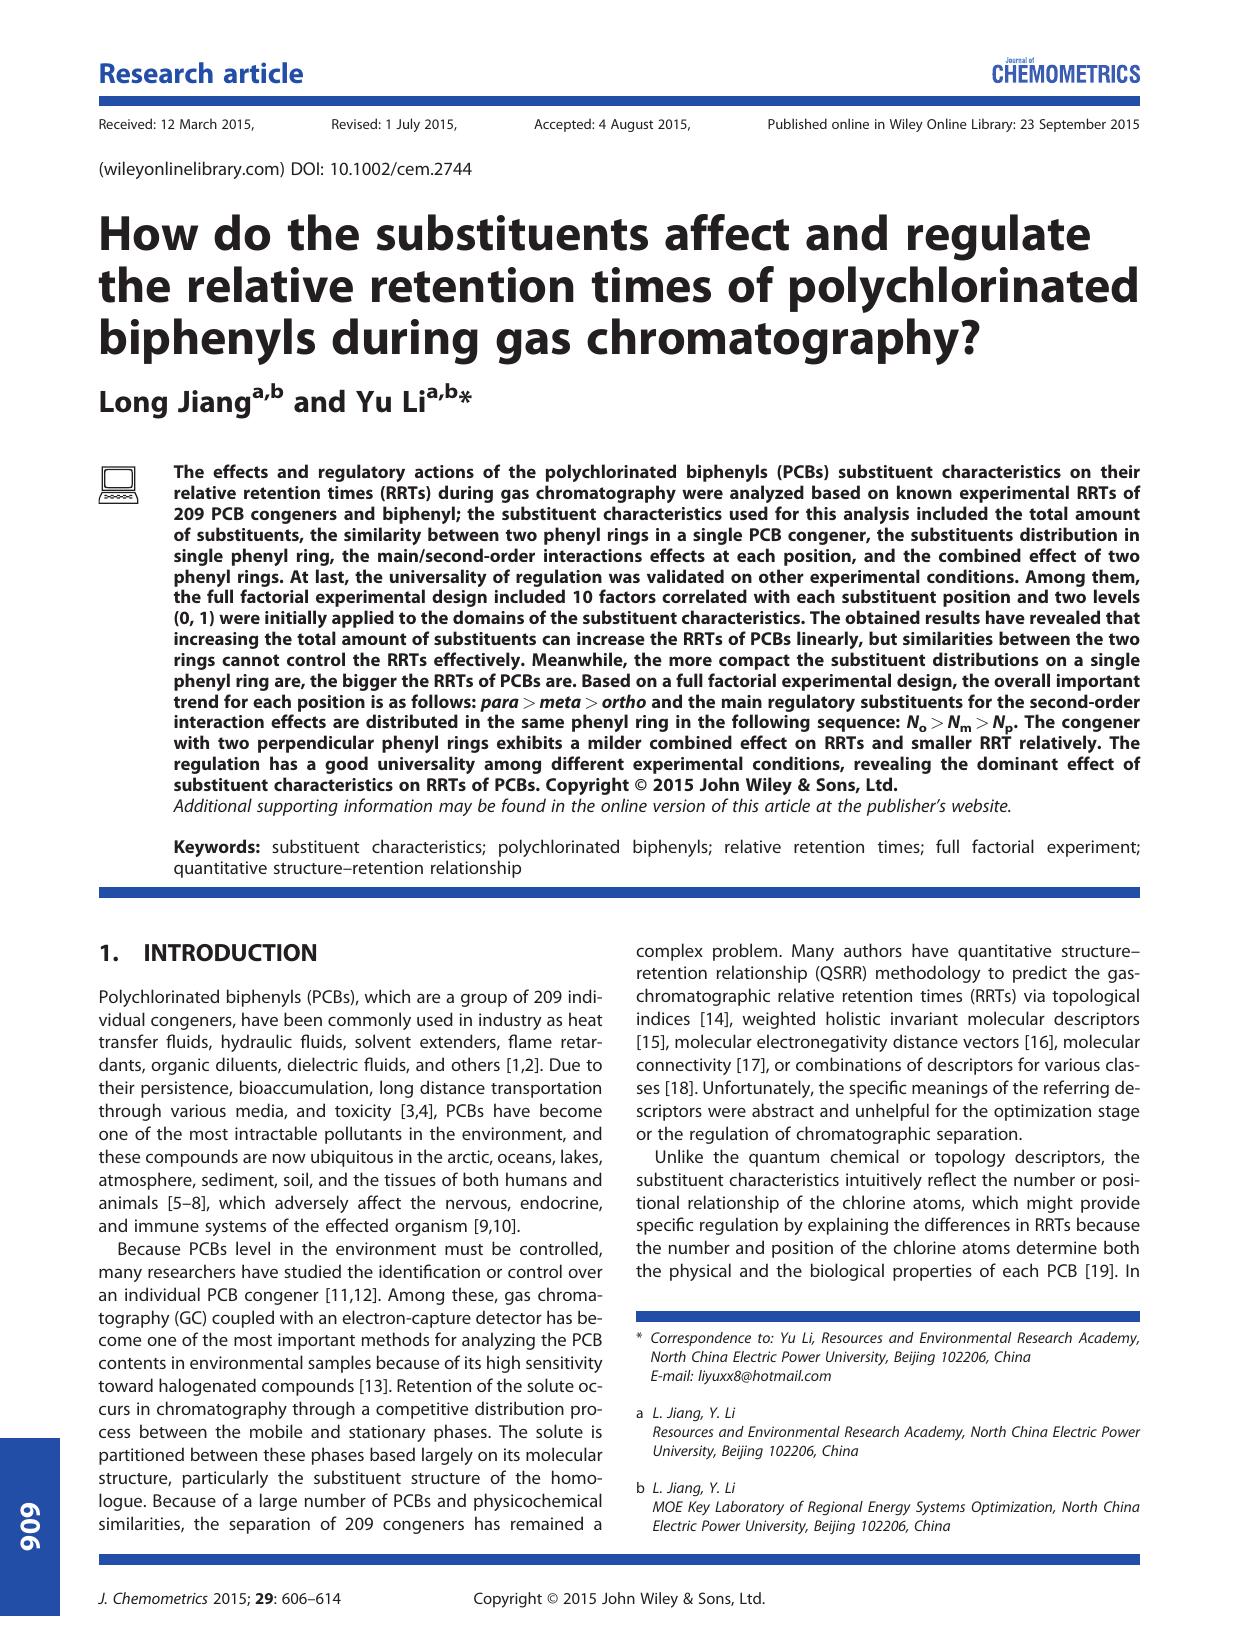 How do the substituents affect and regulate the relative retention times of polychlorinated biphenyls during gas chromatography? by Long Jiang and Yu Li